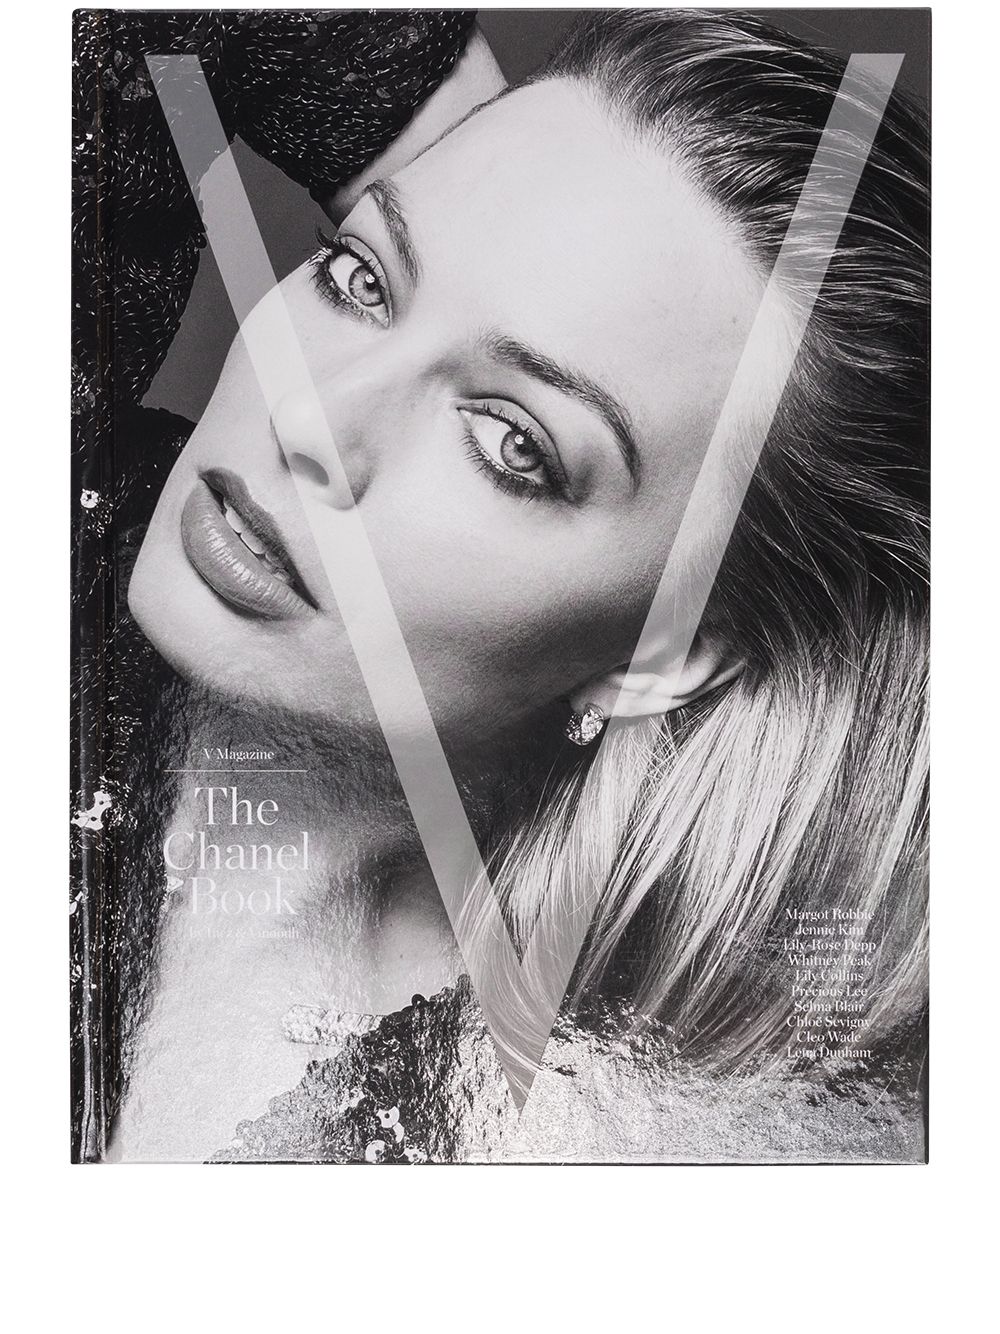 Birkenstock Launch New Collab Margot Covers Chanel Book And More